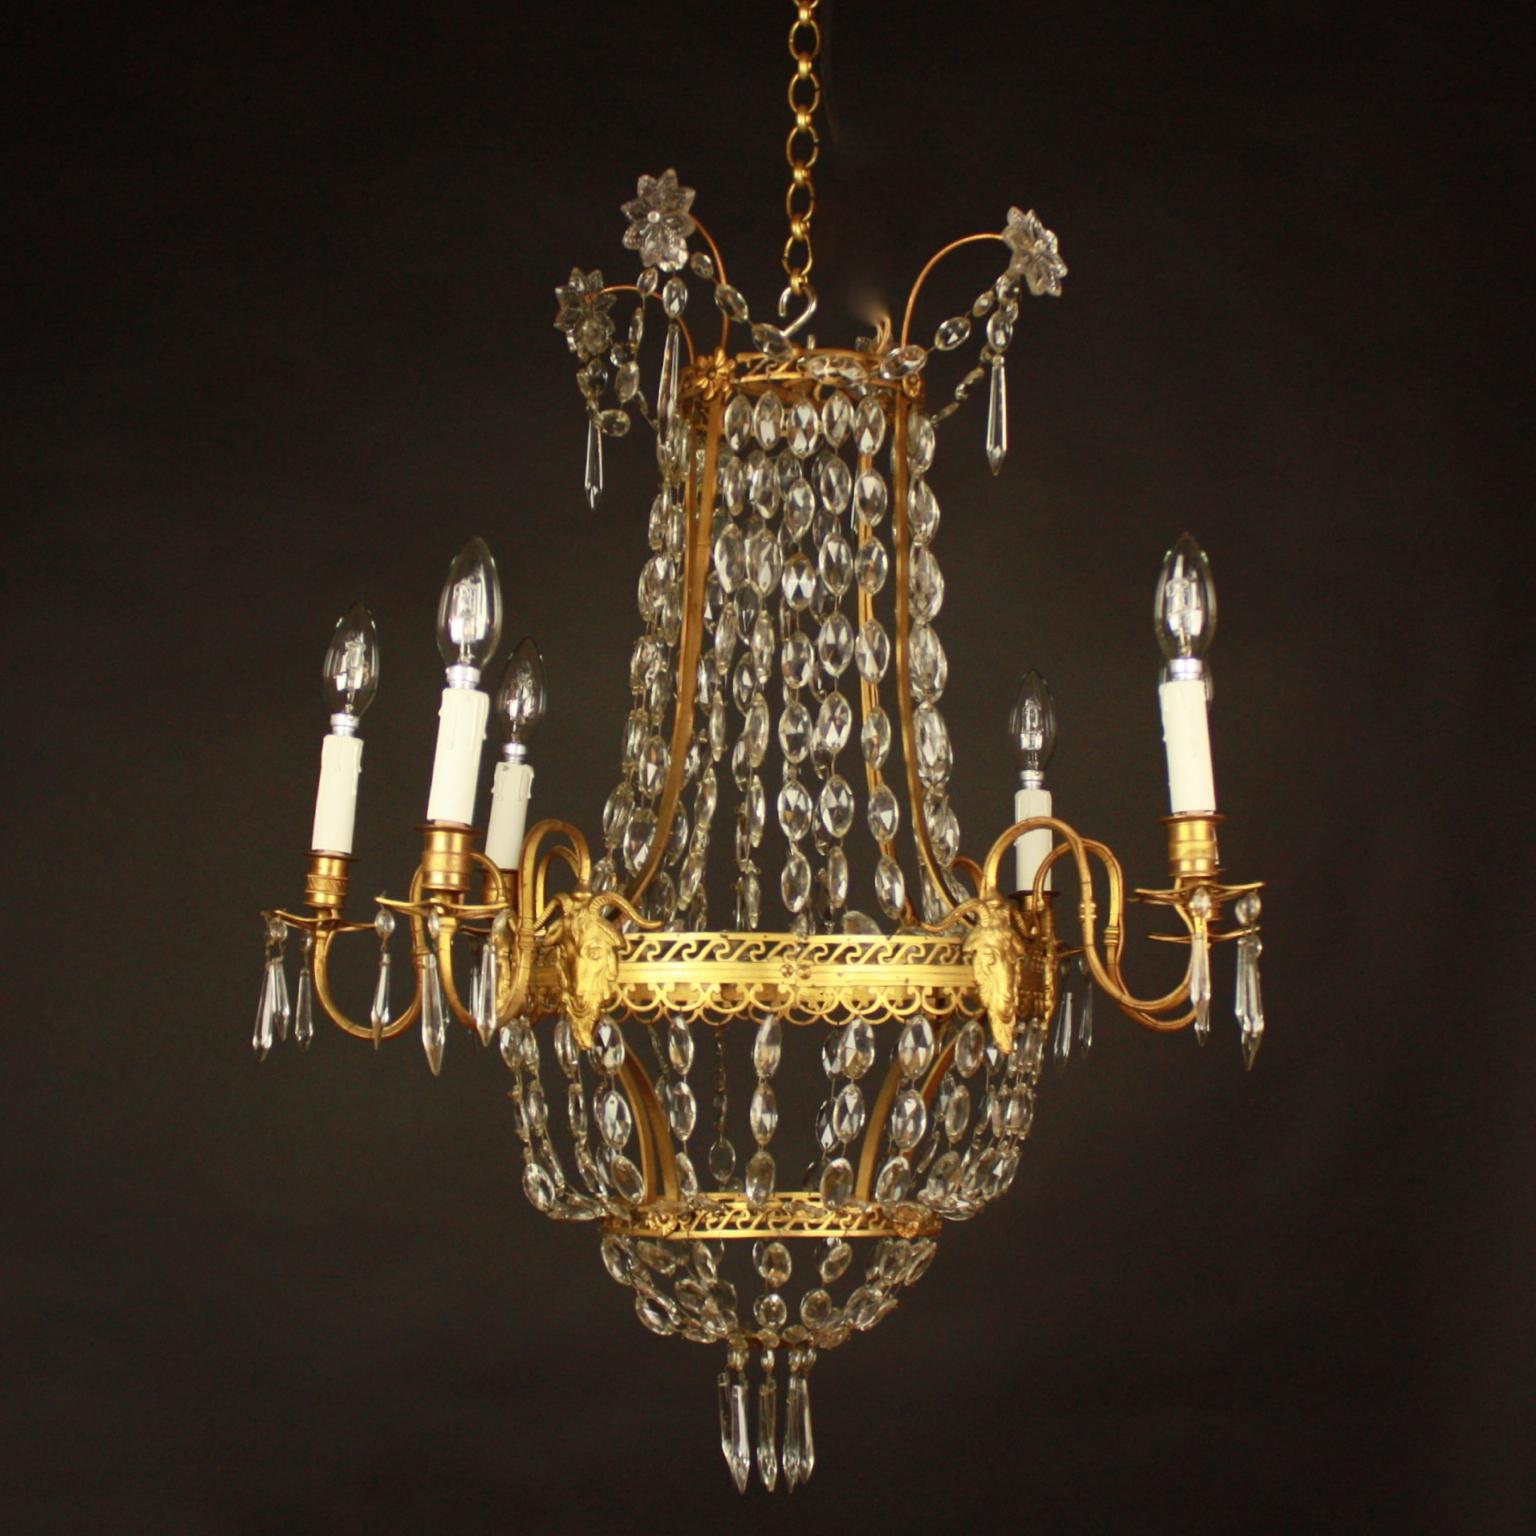 A fine Louis XVI Style gilt-bronze and crystal cut chandelier with six external lights. Surmounted by spray adornment draped with facetted crystals from where chains of lozenge shaped crystal are suspended. Featuring a central pierced bronze tier